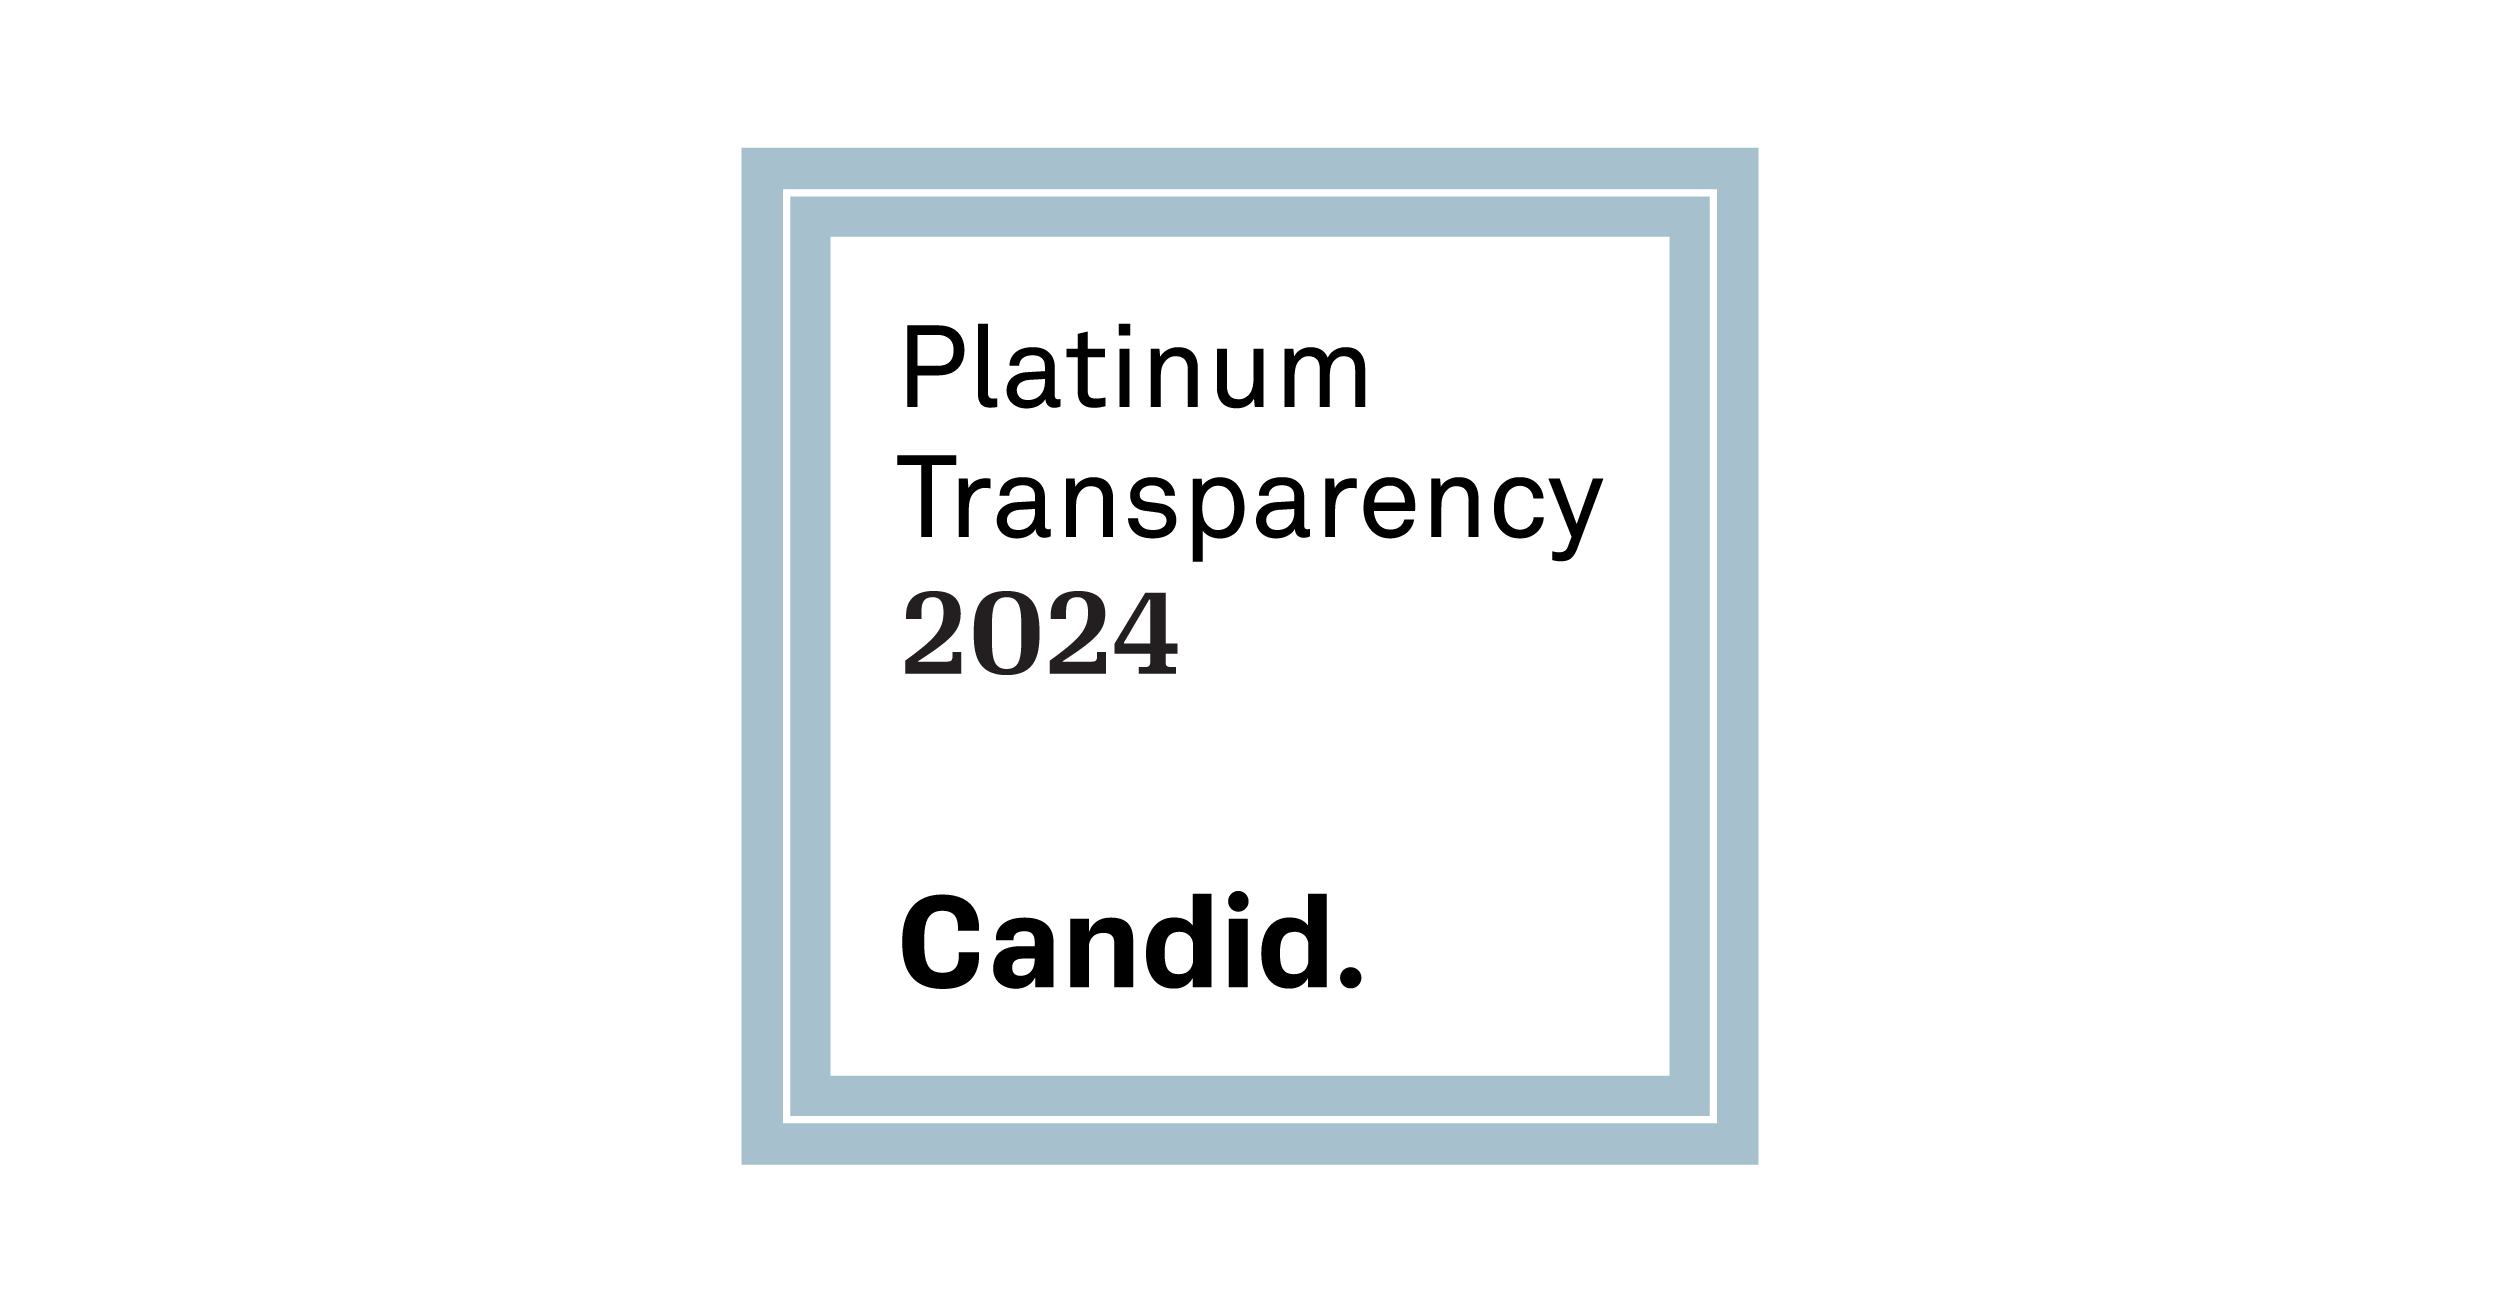 This is the Platinum Seal of Transparency from Candid. It has a platinum border, white square center, and text that says 'Platinum Transparency 2024 Candid.'